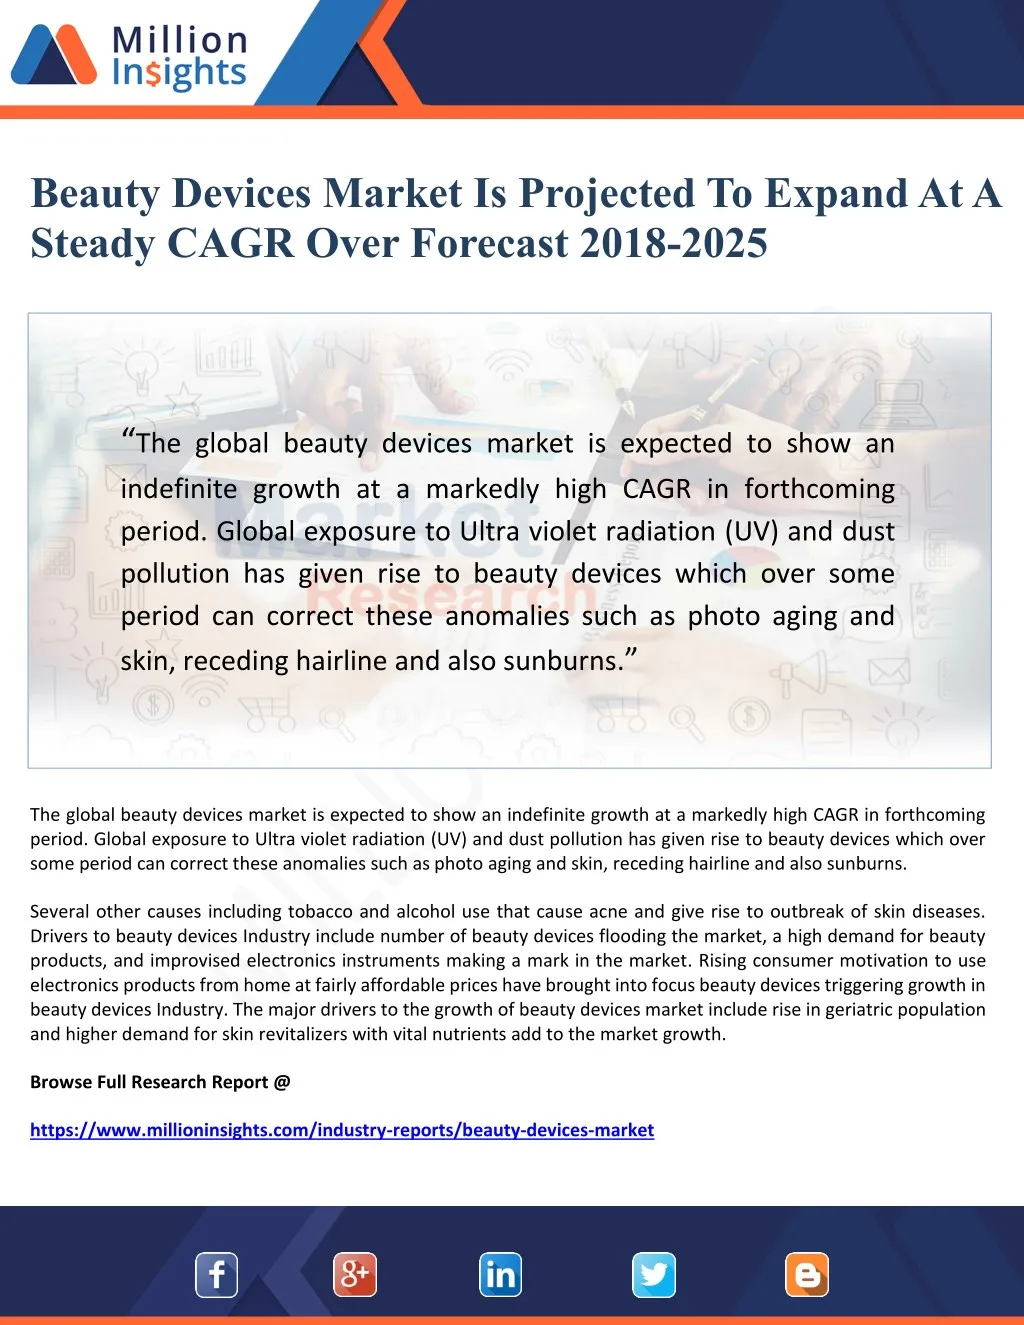 beauty devices market is projected to expand